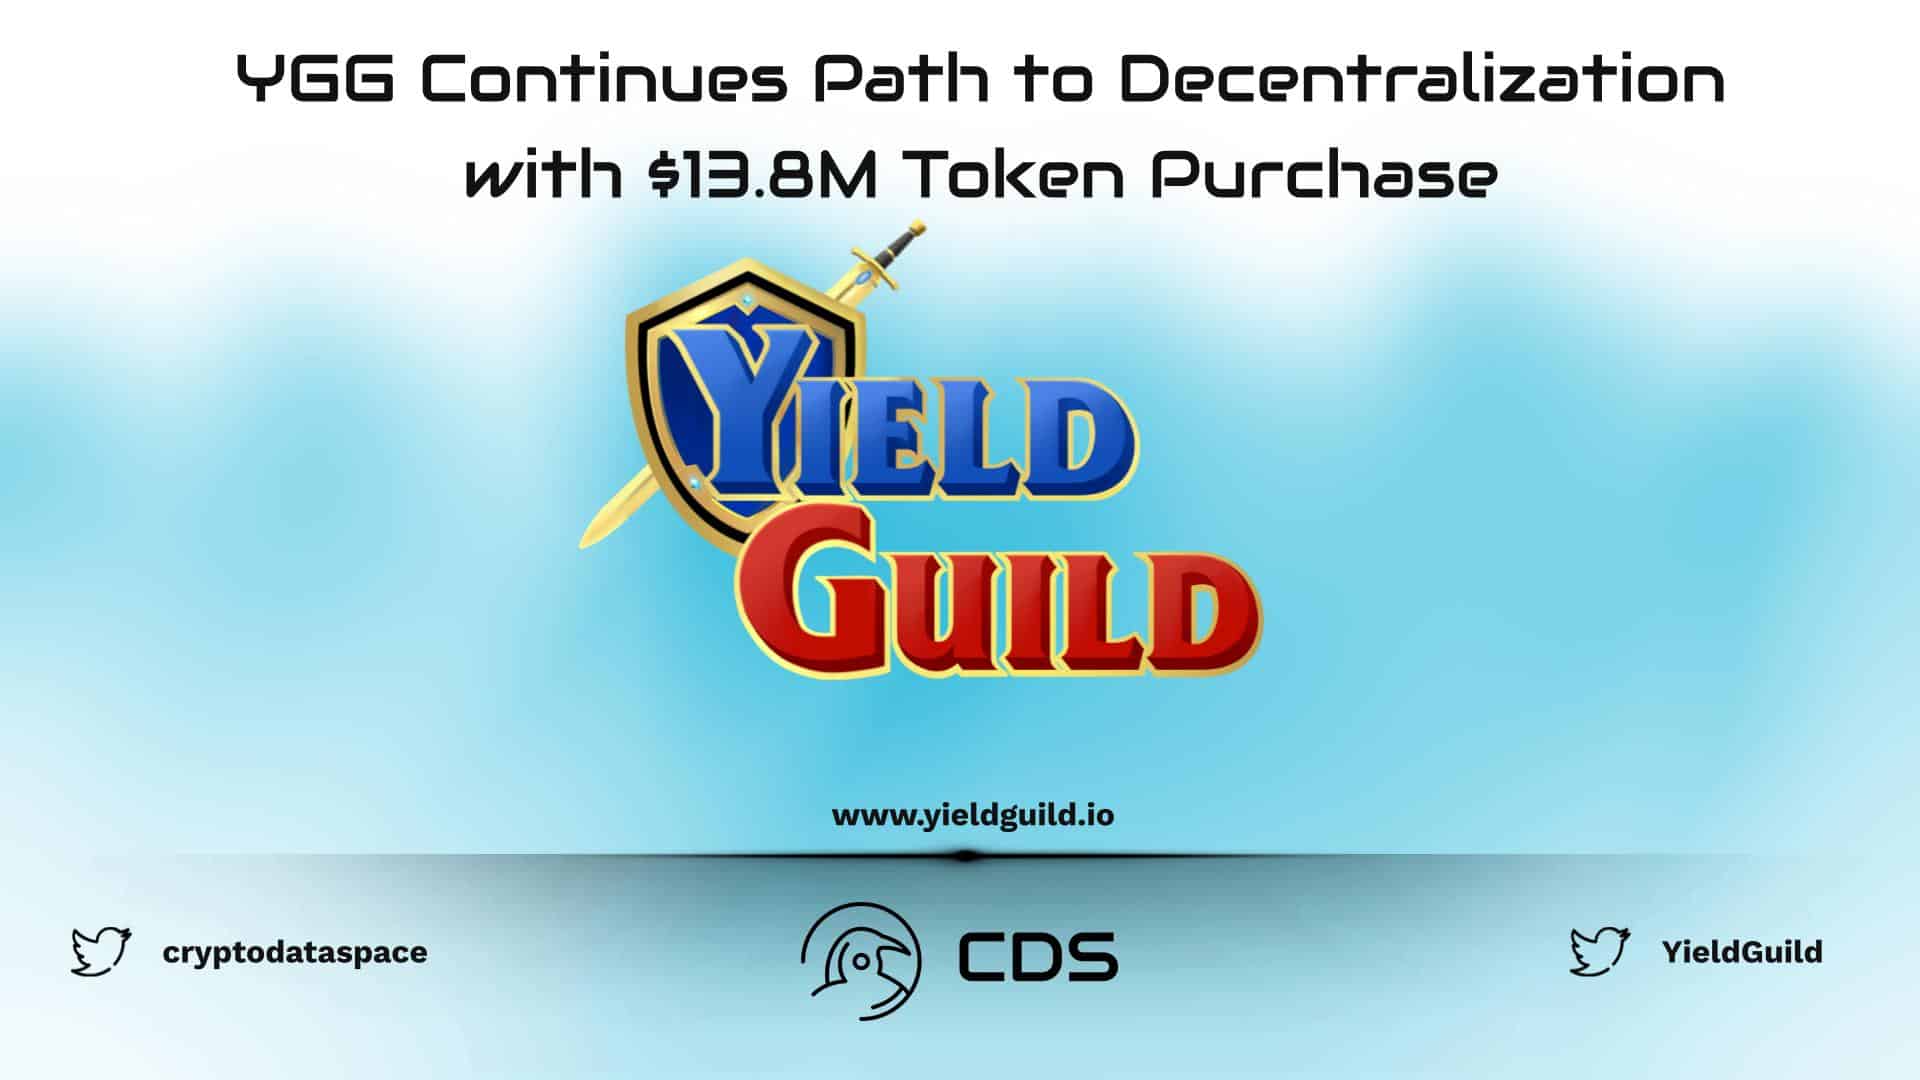 YGG Continues Path to Decentralization with $13.8M Token Purchase